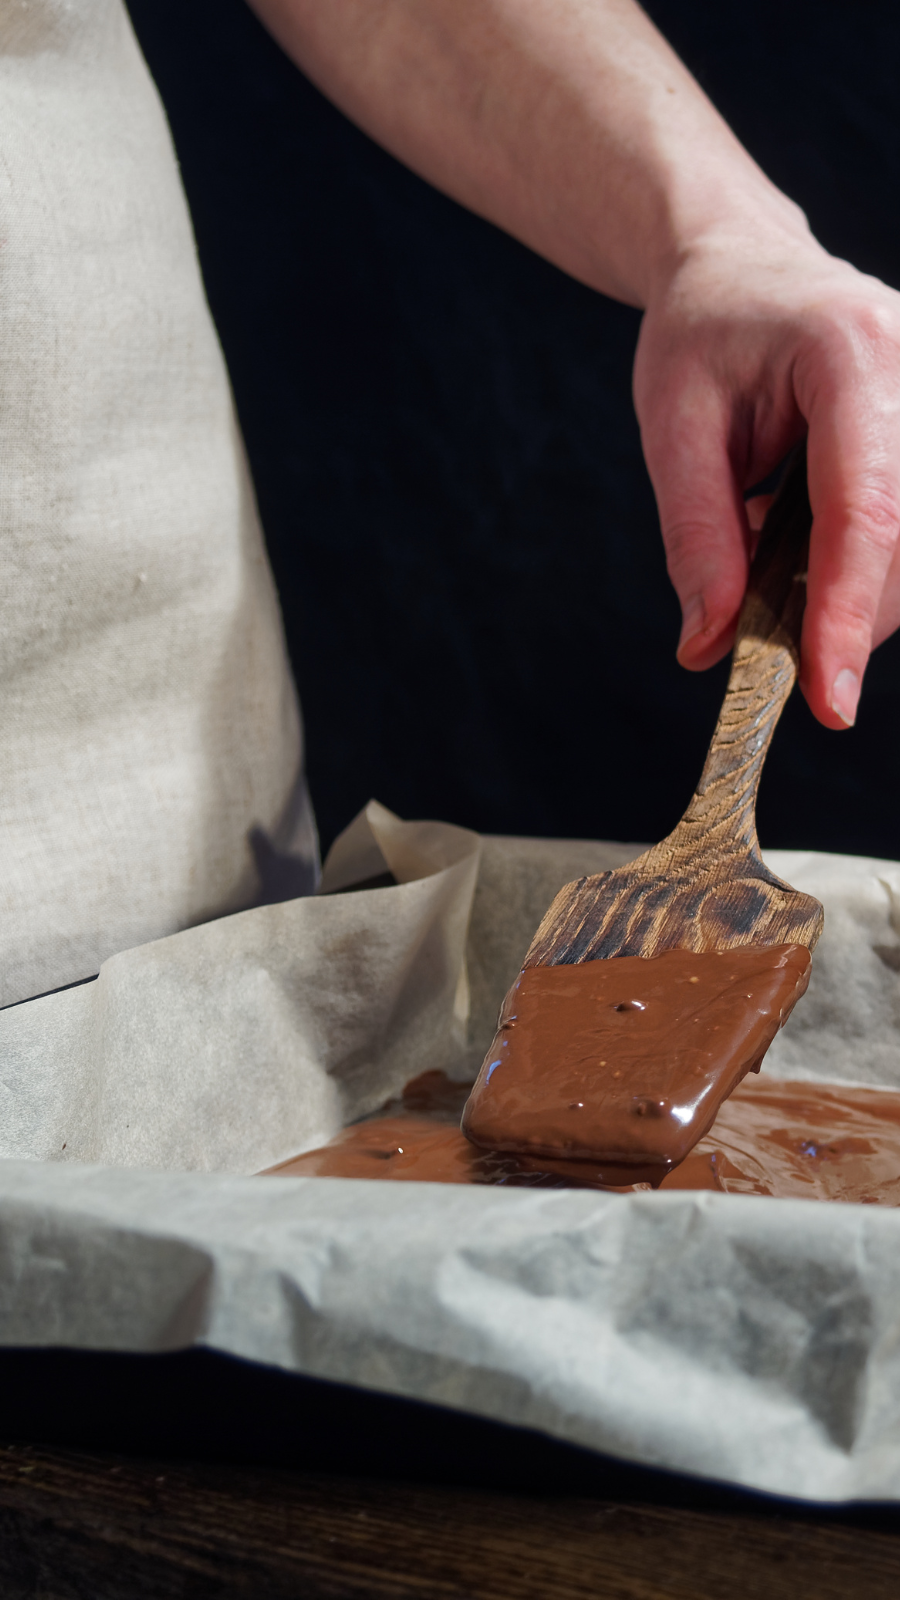 chocolate making.png__PID:784e7fa2-b23d-4756-bc8a-5d94df8a3181